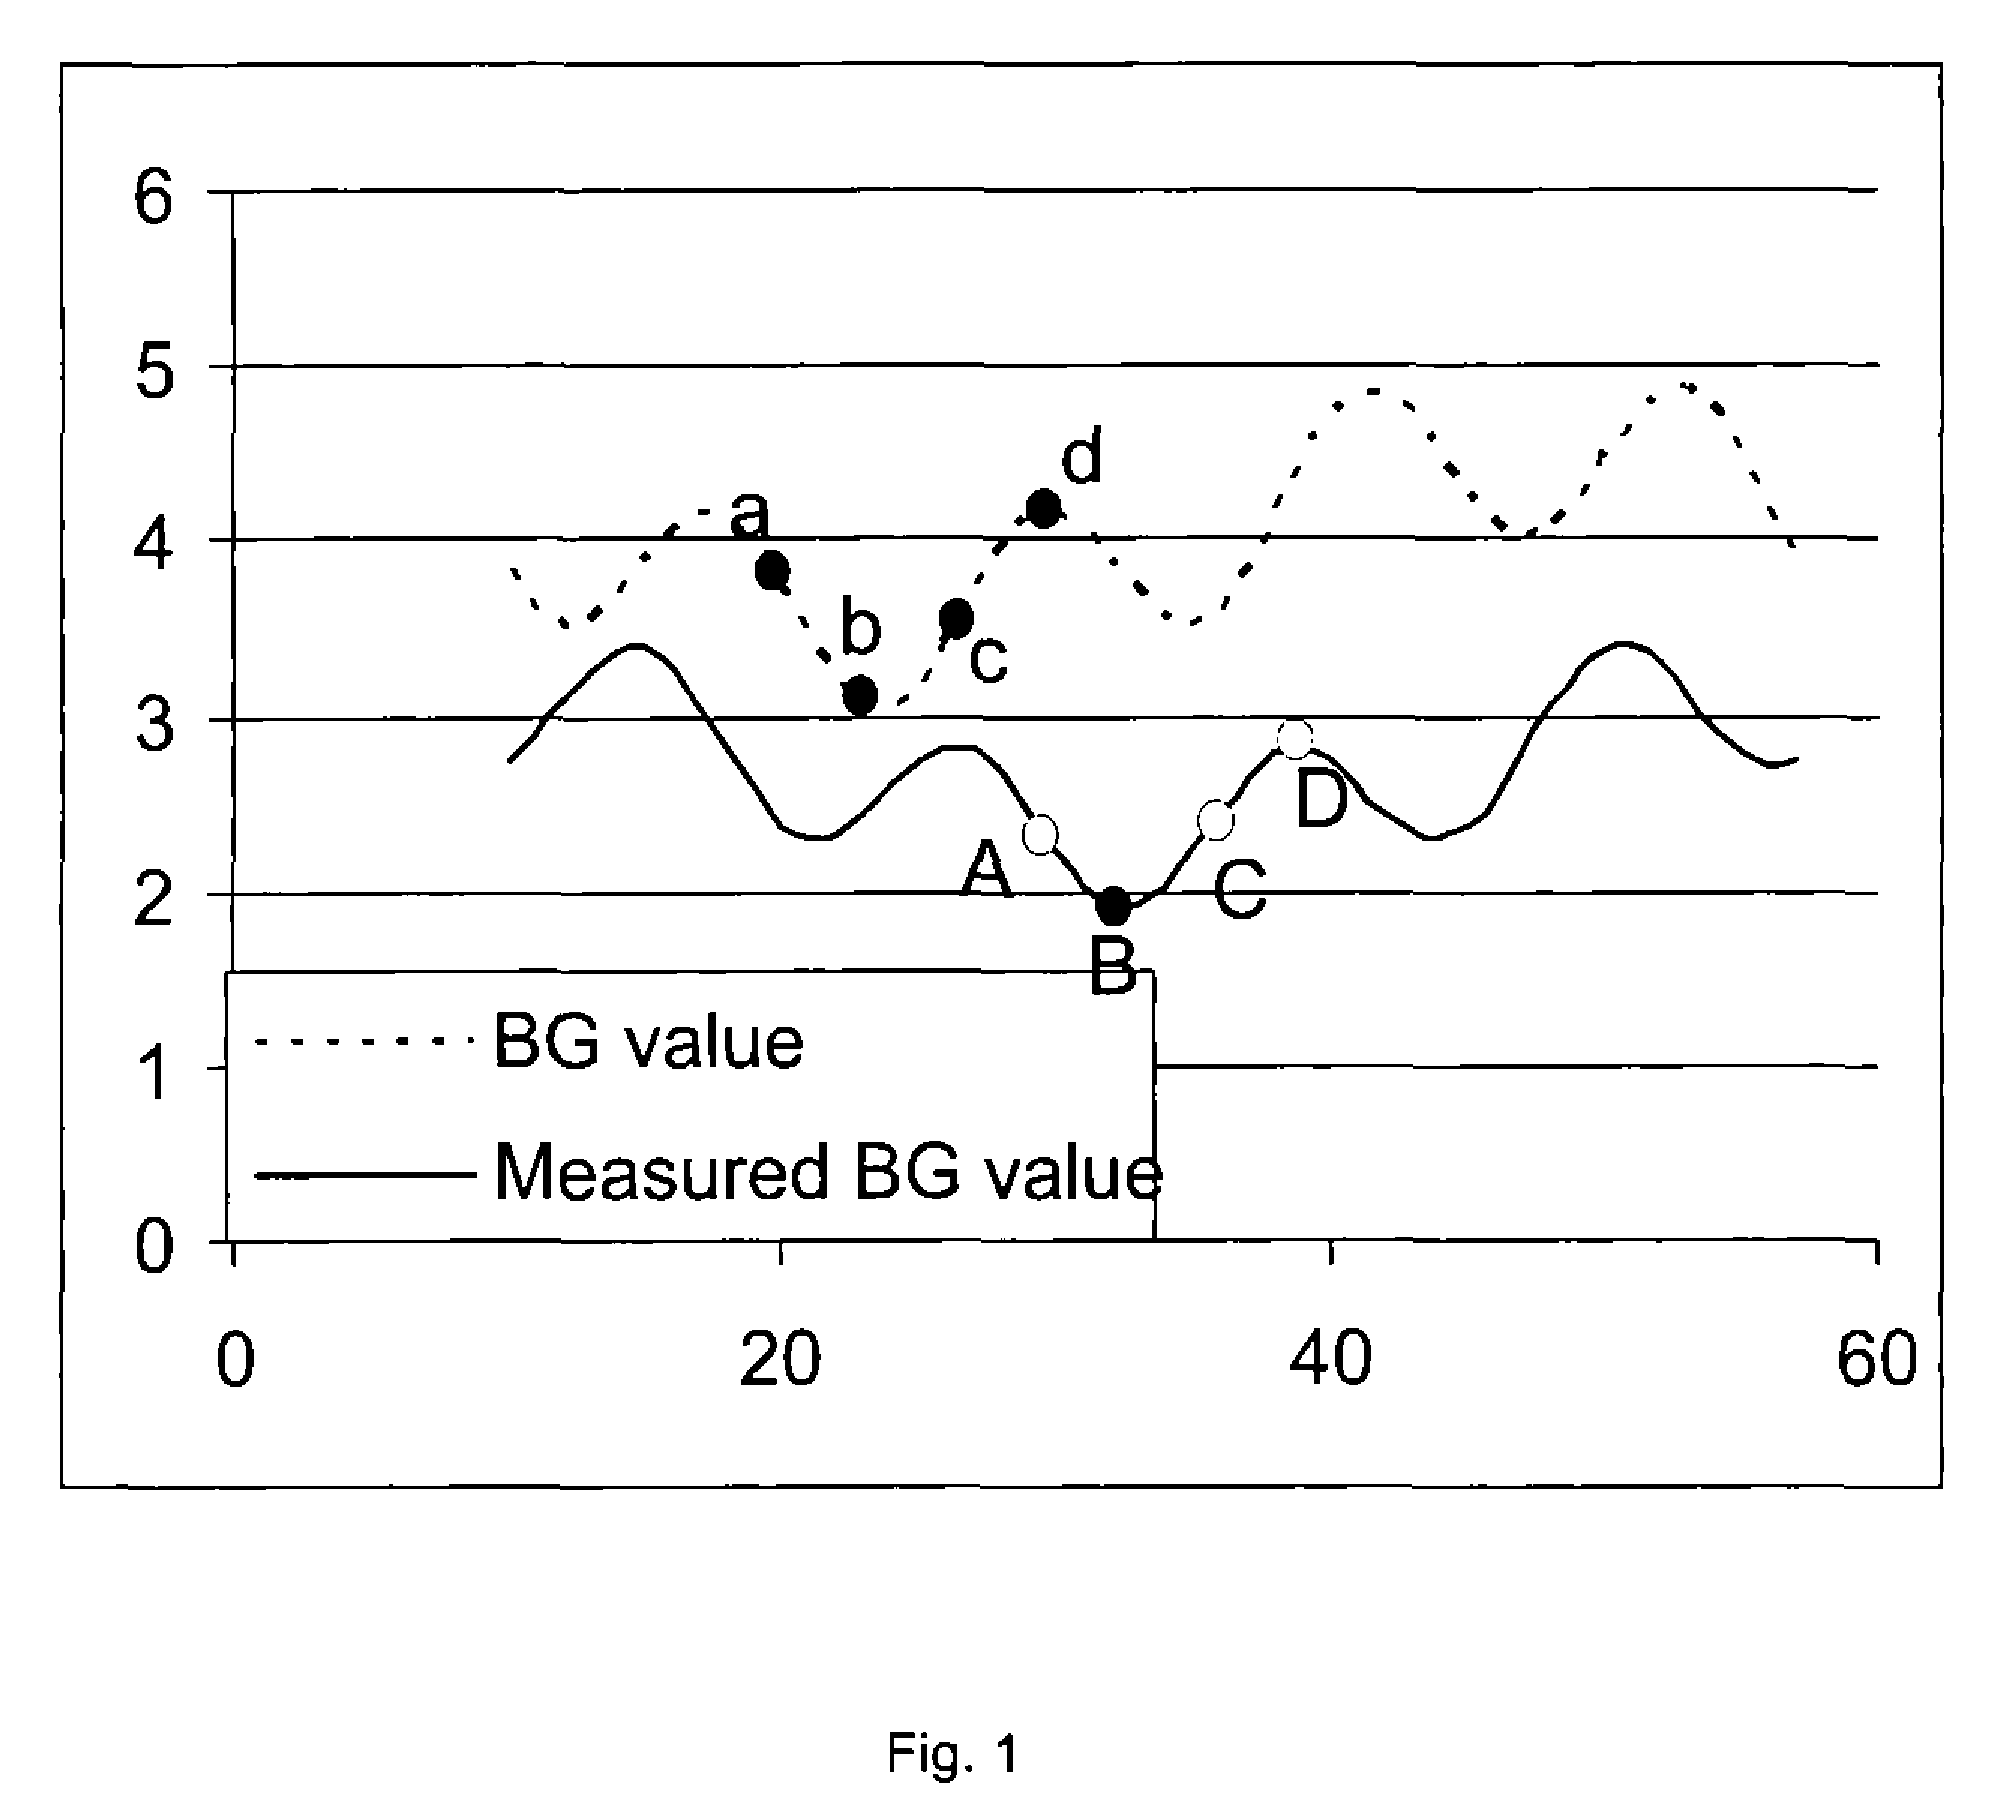 System and Method for Estimating the Glucose Concentration in Blood